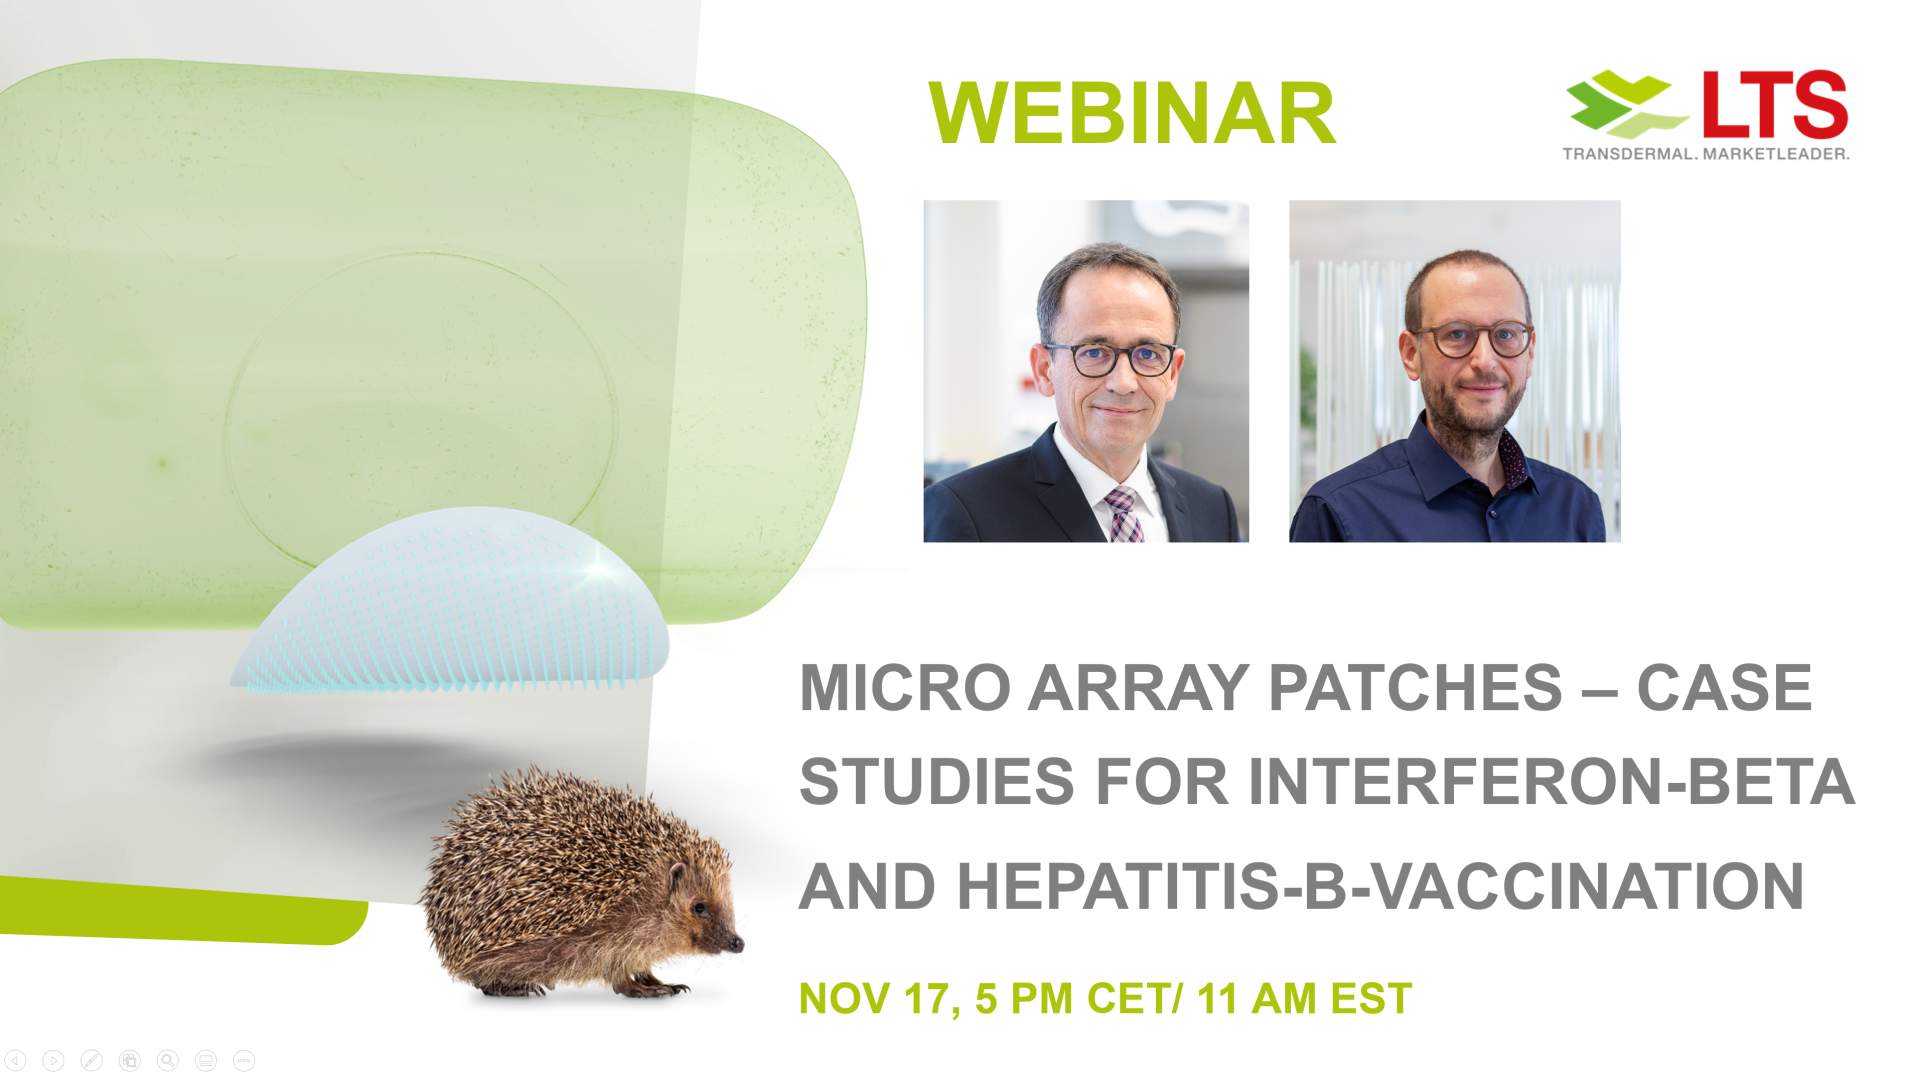 LTS Webinar: Micro Array Patches